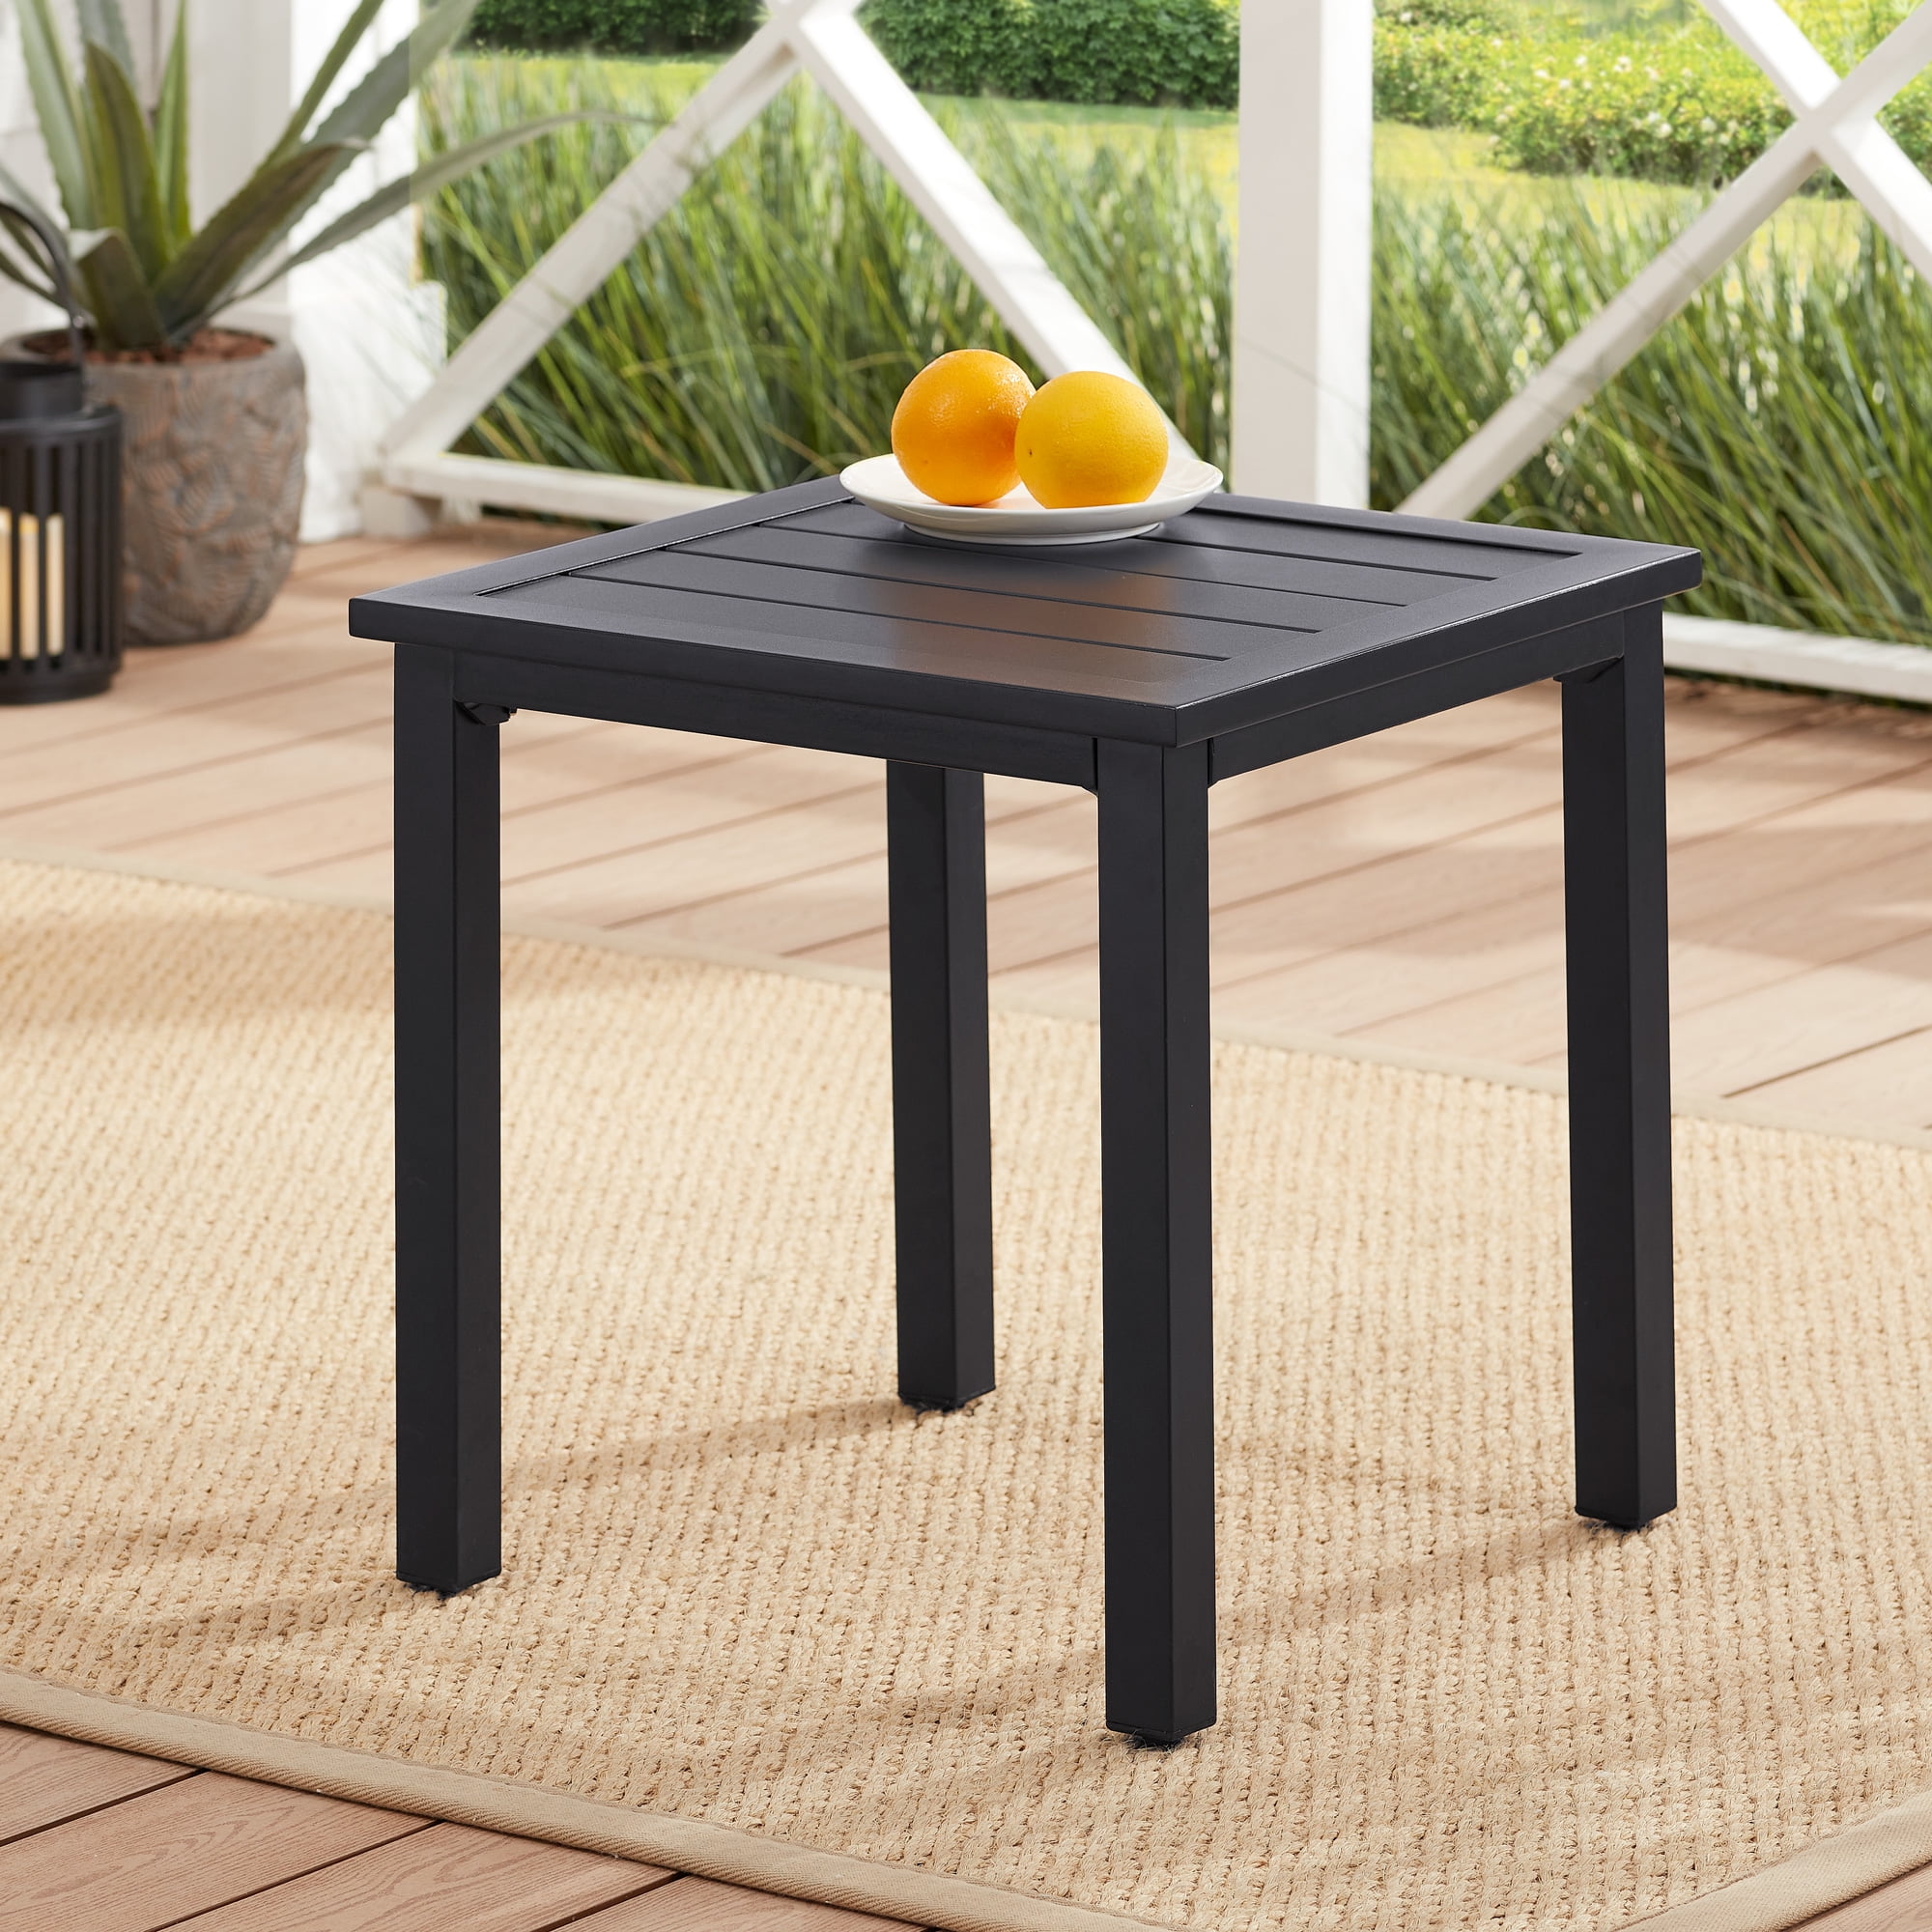 Mainstays Heritage Park 20" Square Slat Top Outdoor Patio